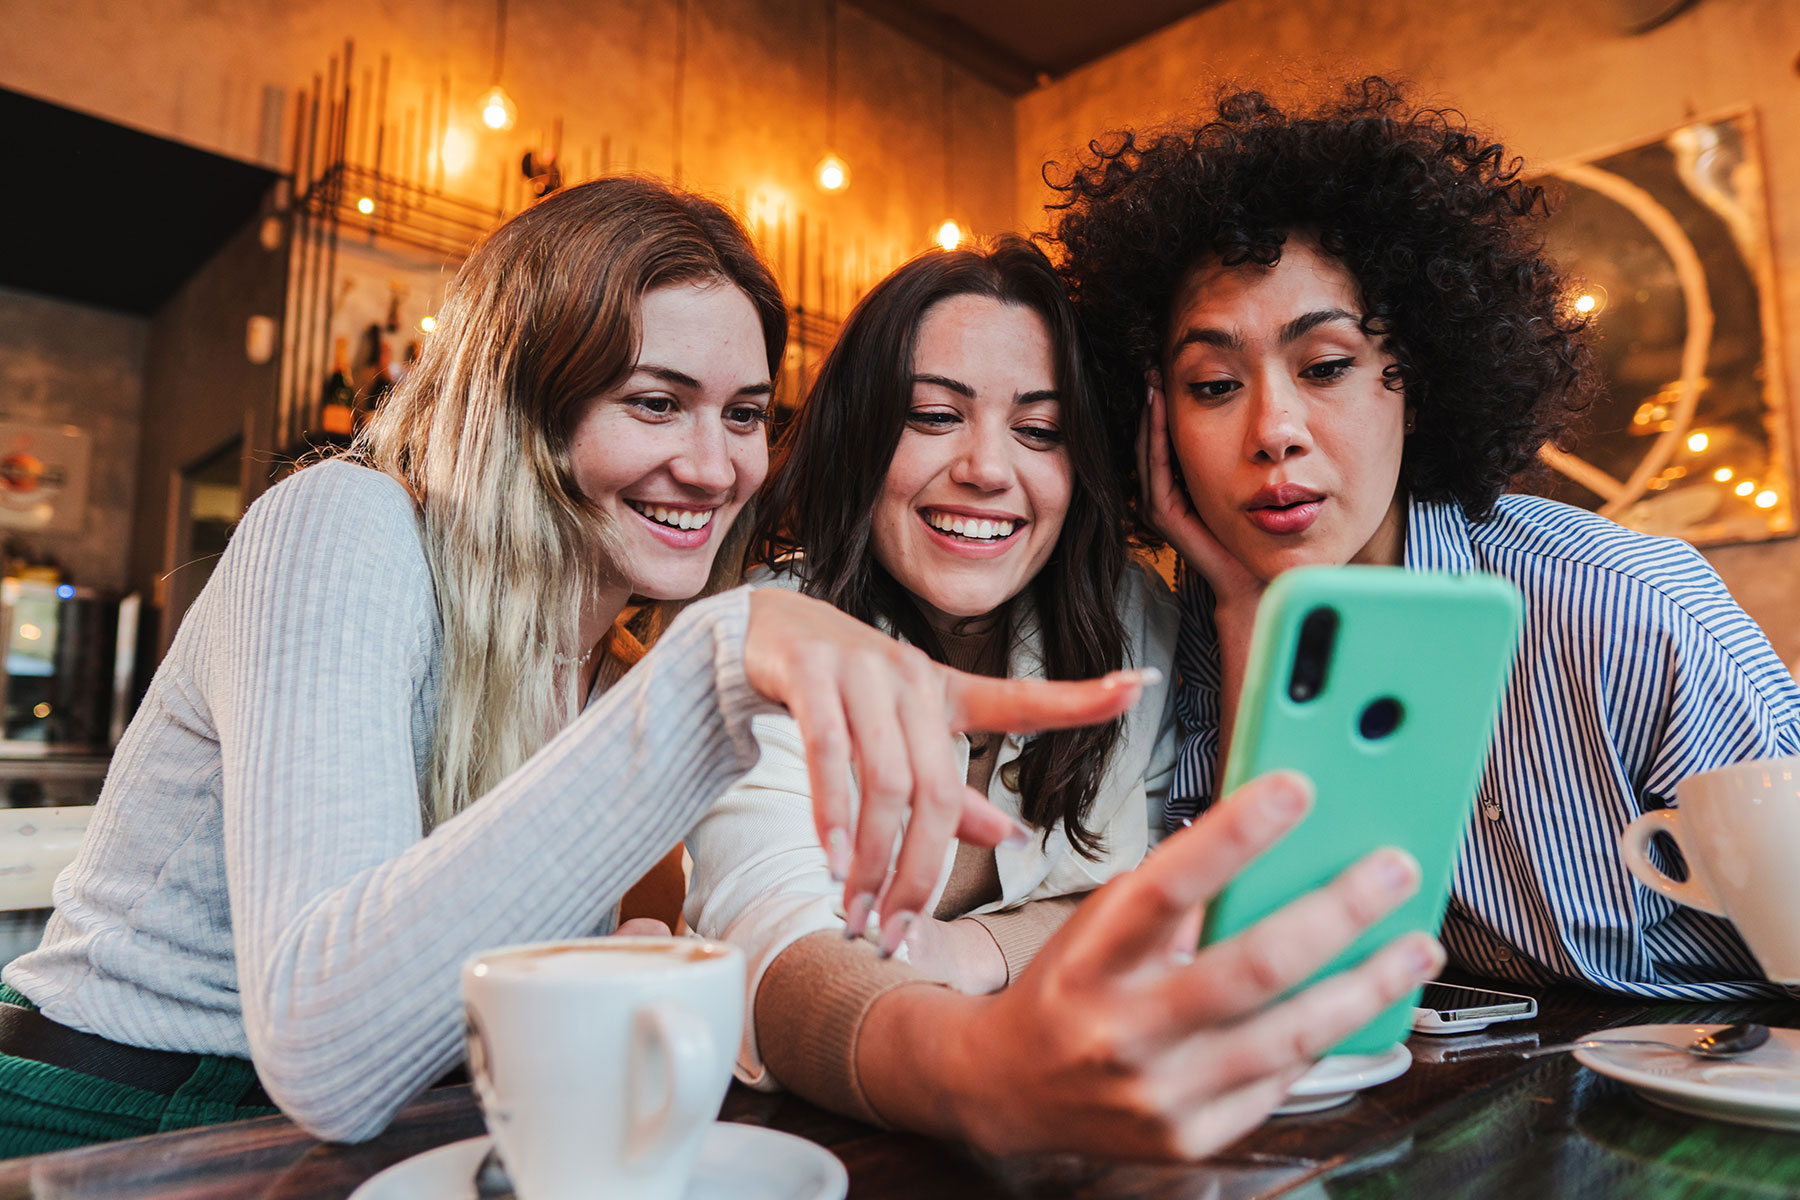 Three women who don't understand social media and addiction are connected